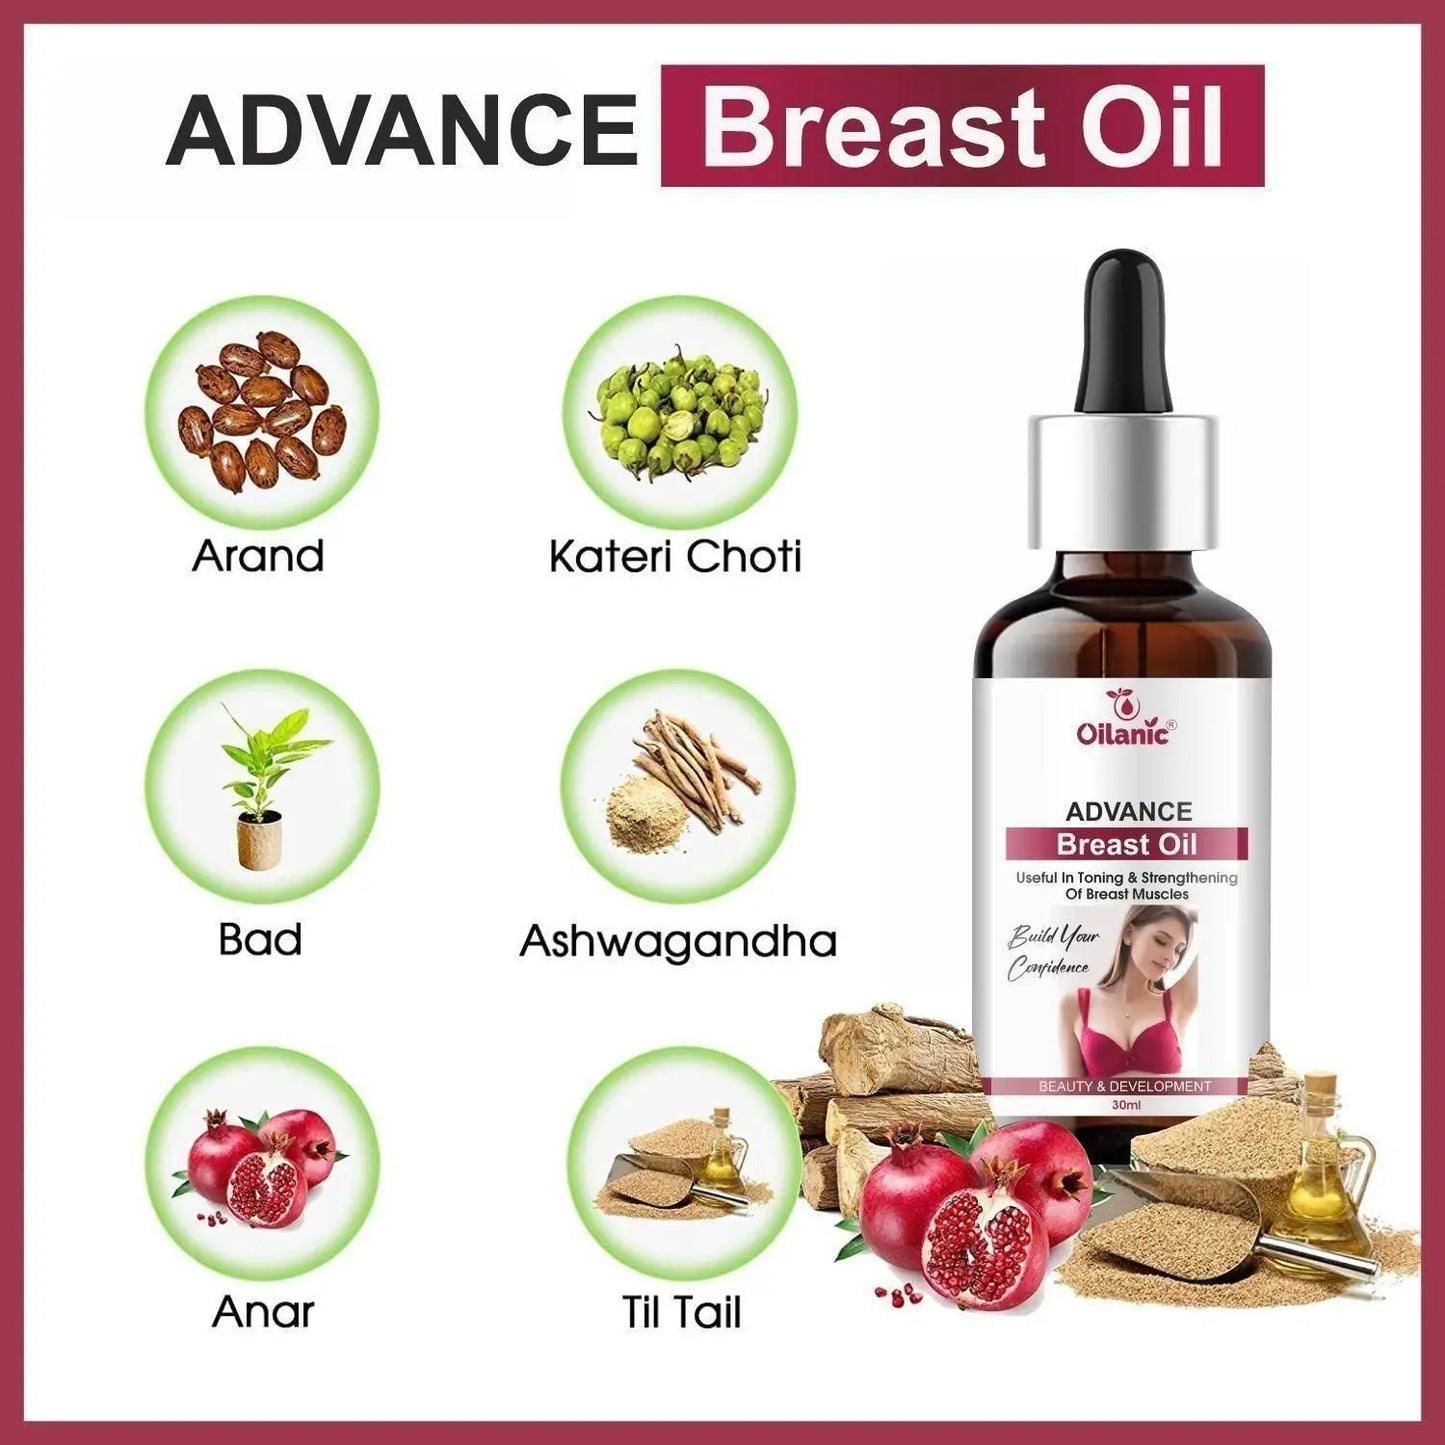 Advance Breast Oil (New & improved formulation) (BUY 1 GET 1 FREE)